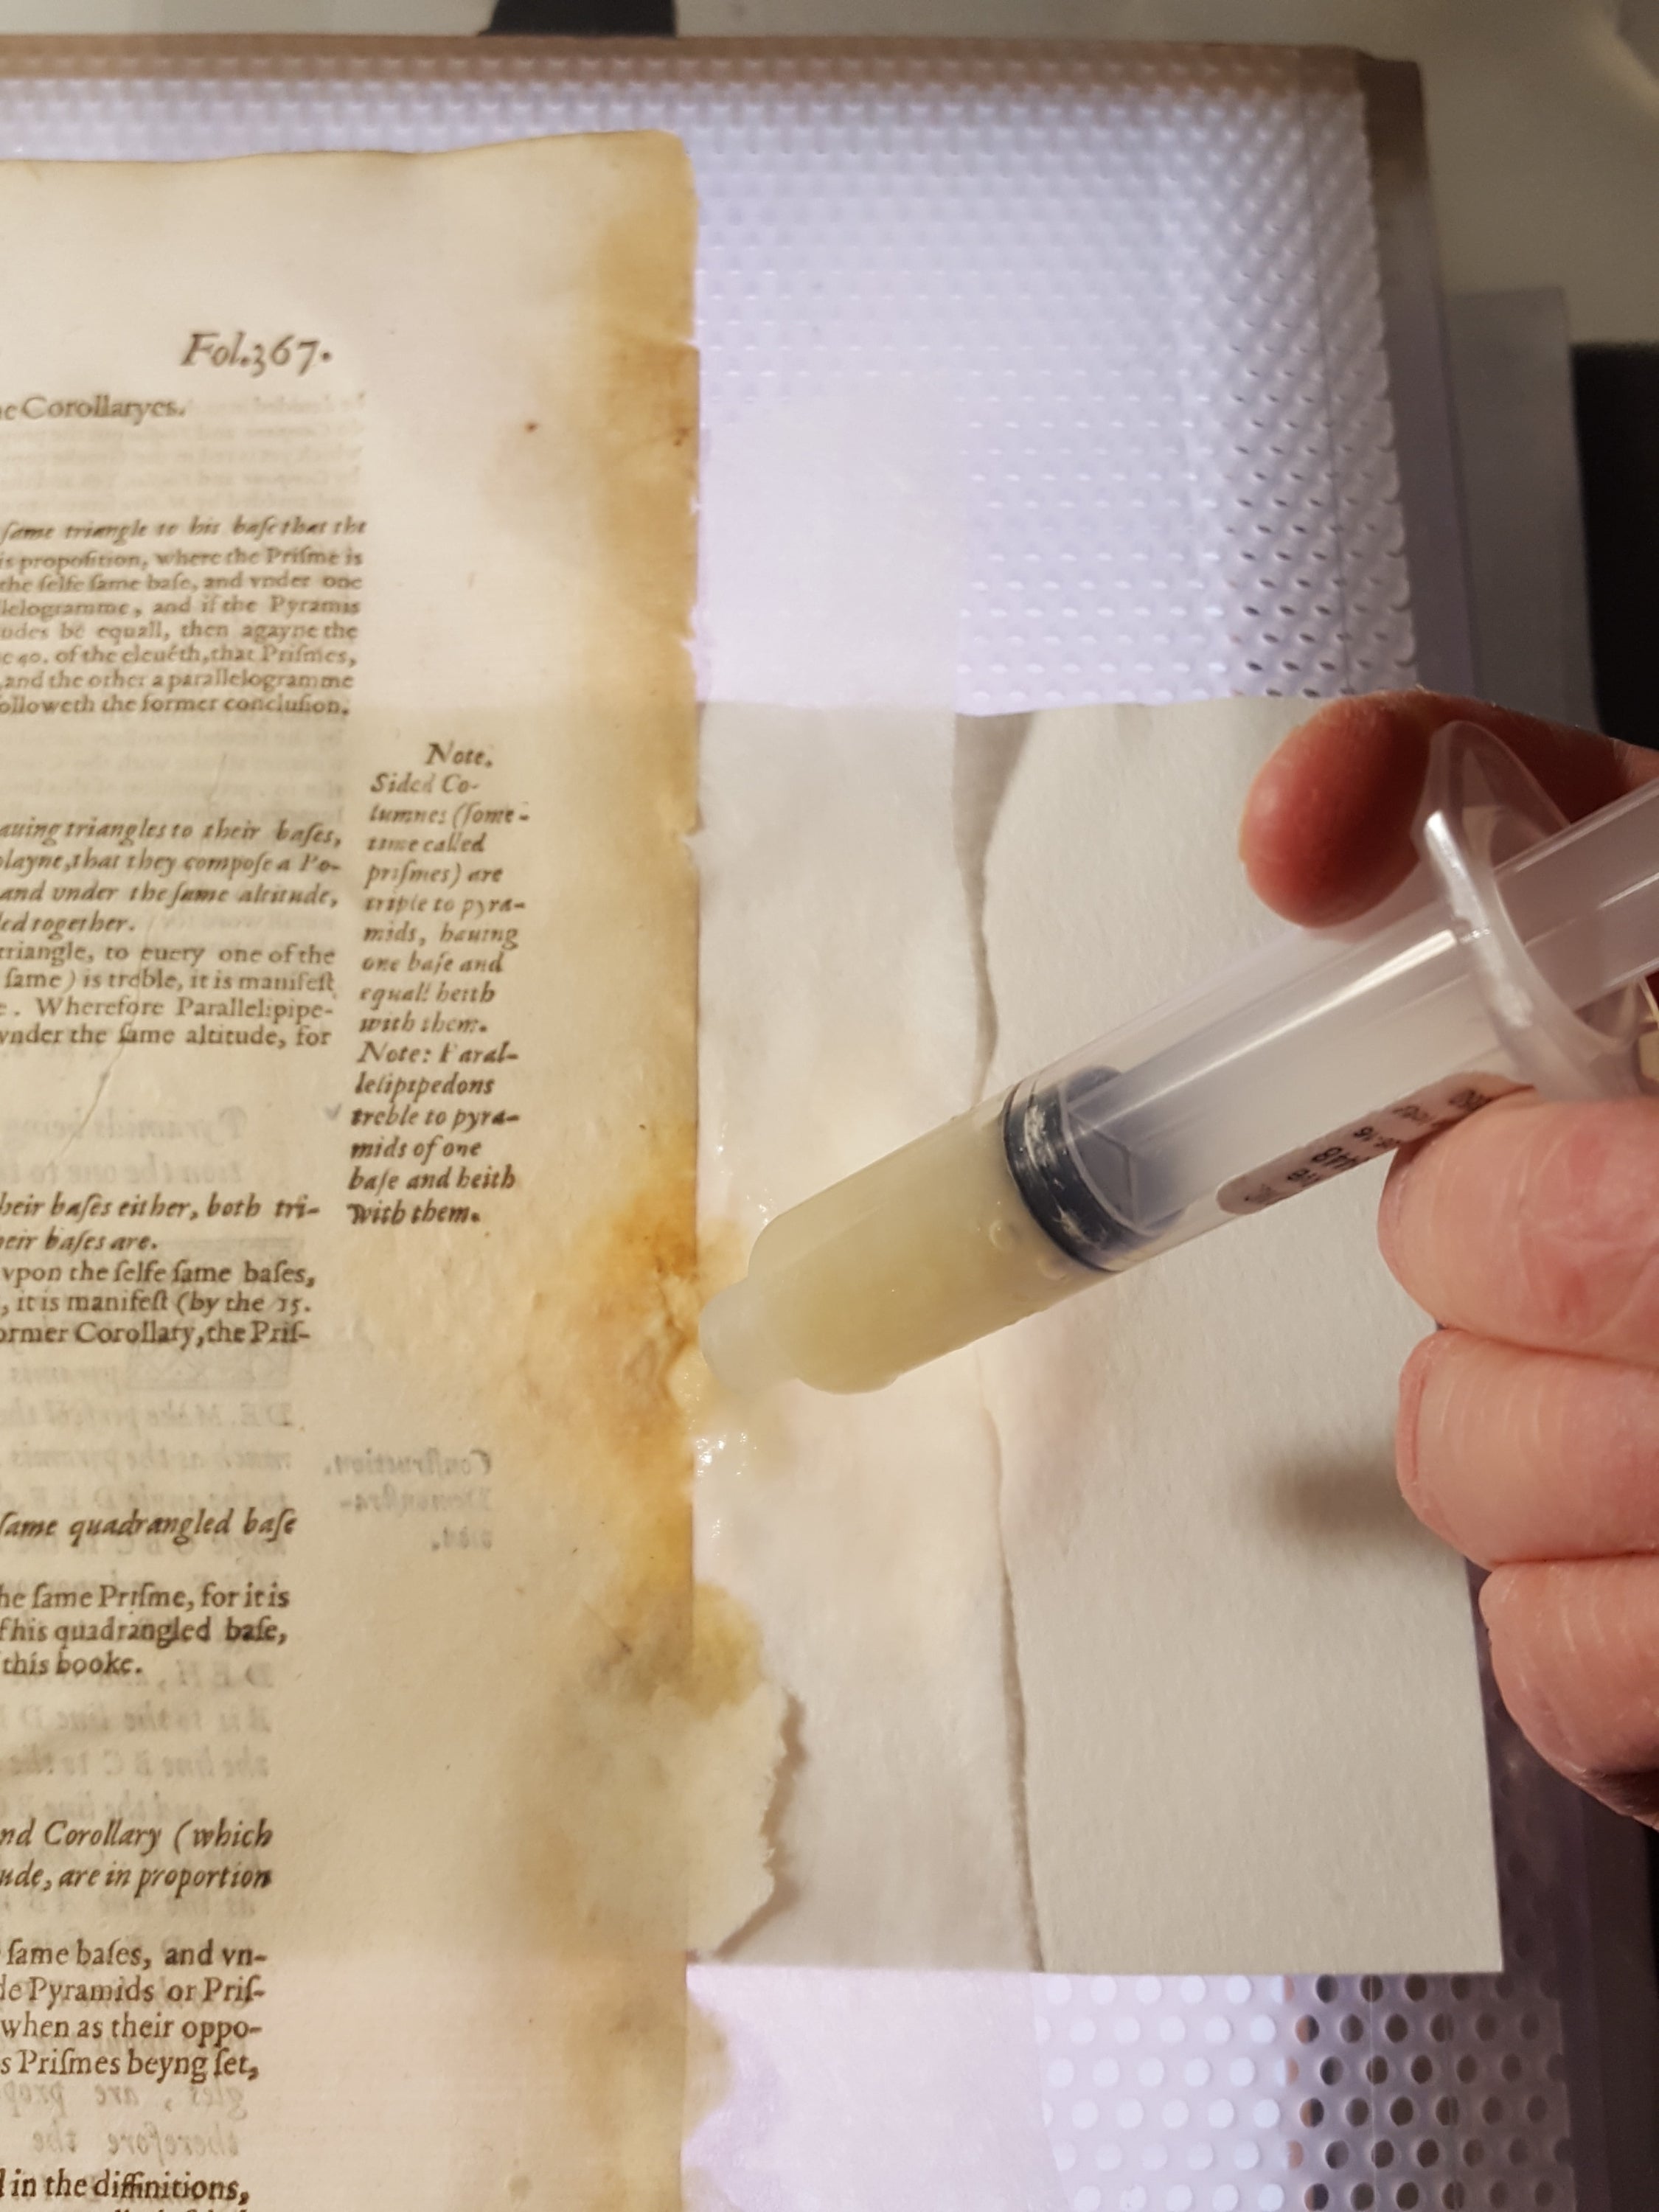 Pulp being applied with syringe